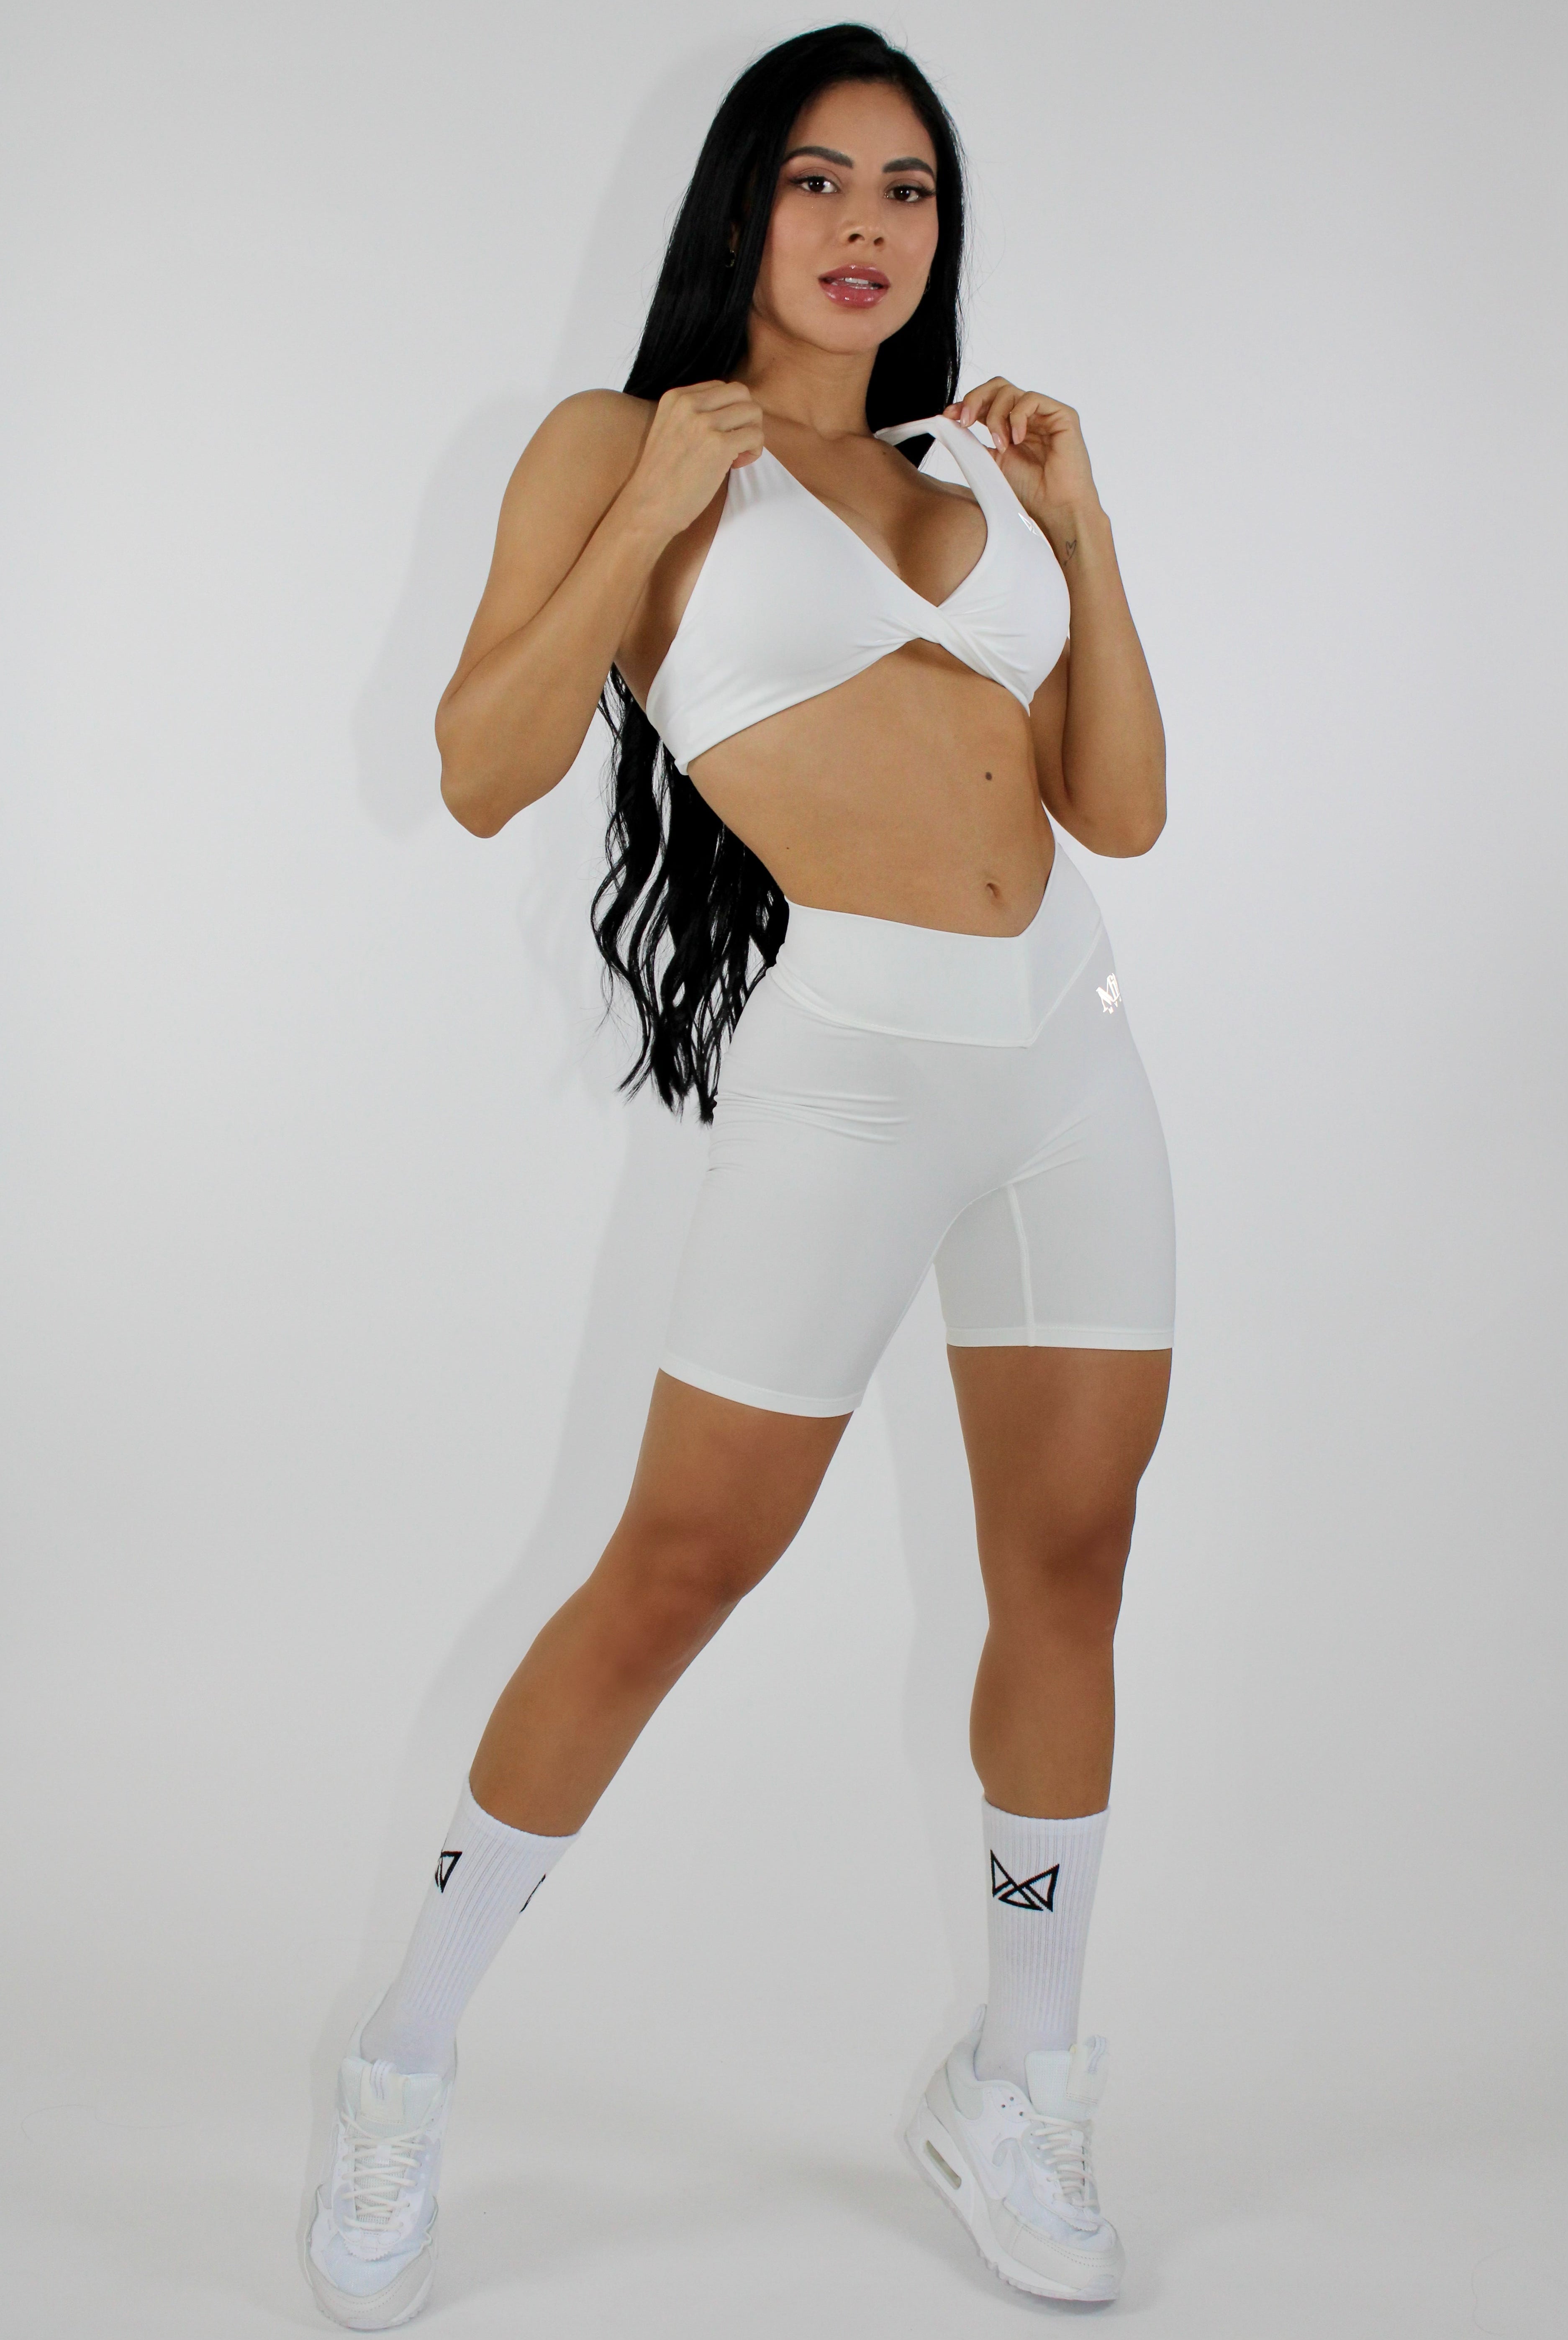 MILA MVMT Athletic Sportswear Aria Sports Bra & Buttery Soft Leggings & Shorts Gym Set in White Front View